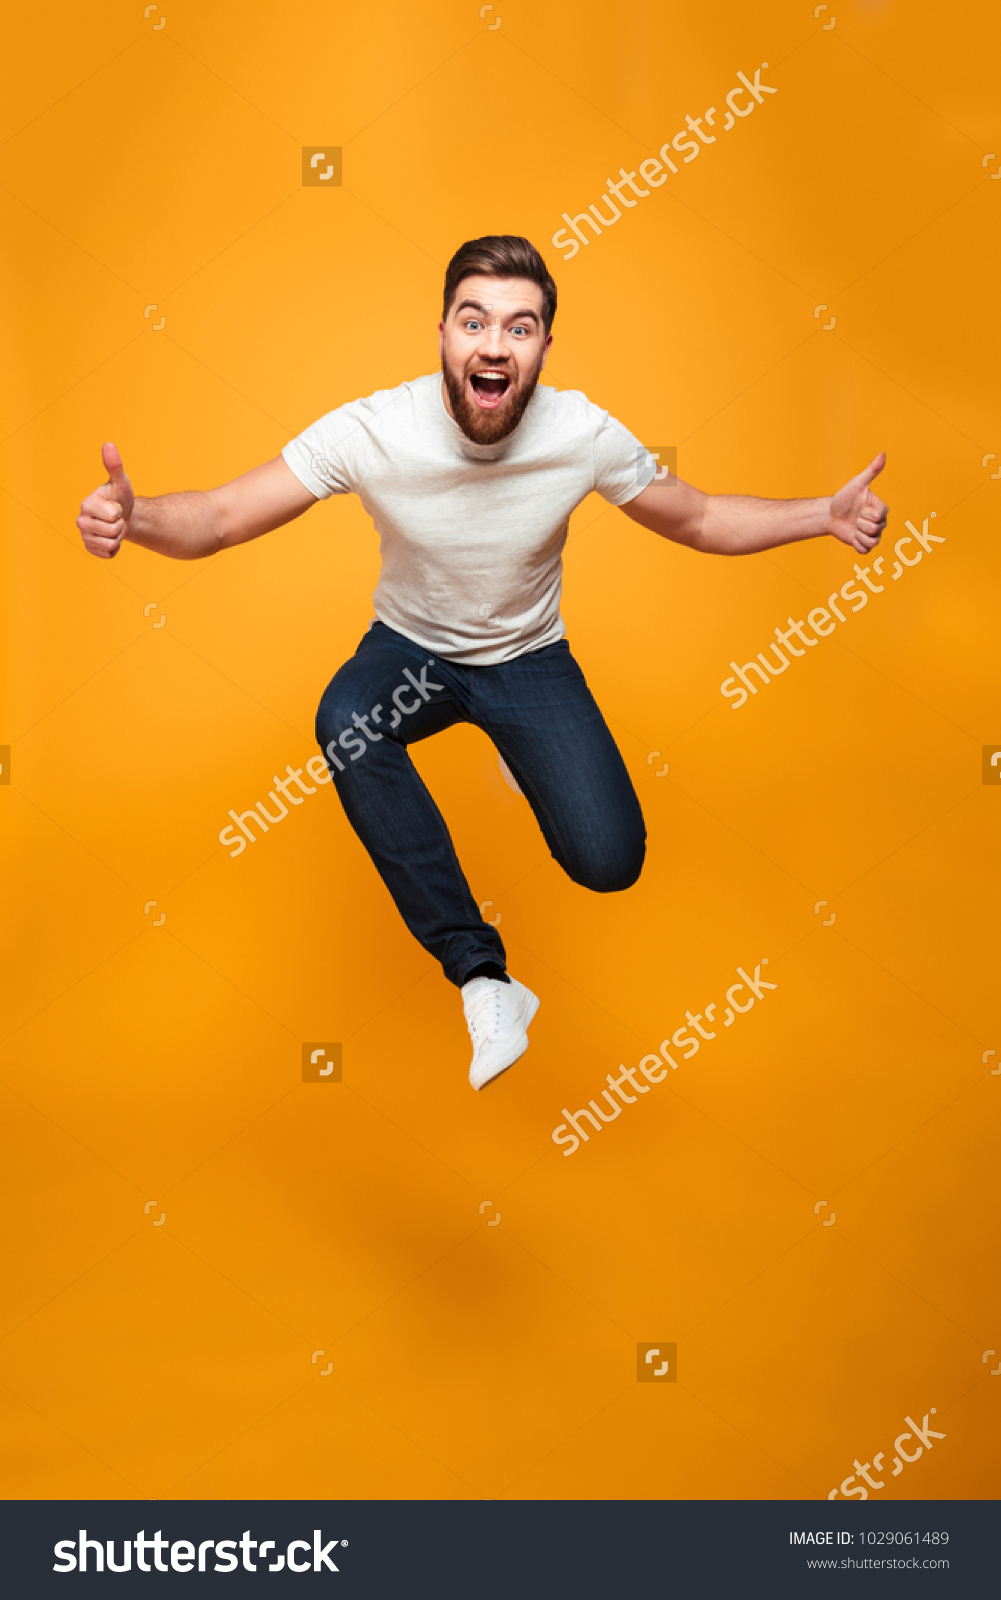 Full length portrait of an excited bearded man jumping and showing thumbs up isolated over yellow background #1029061489